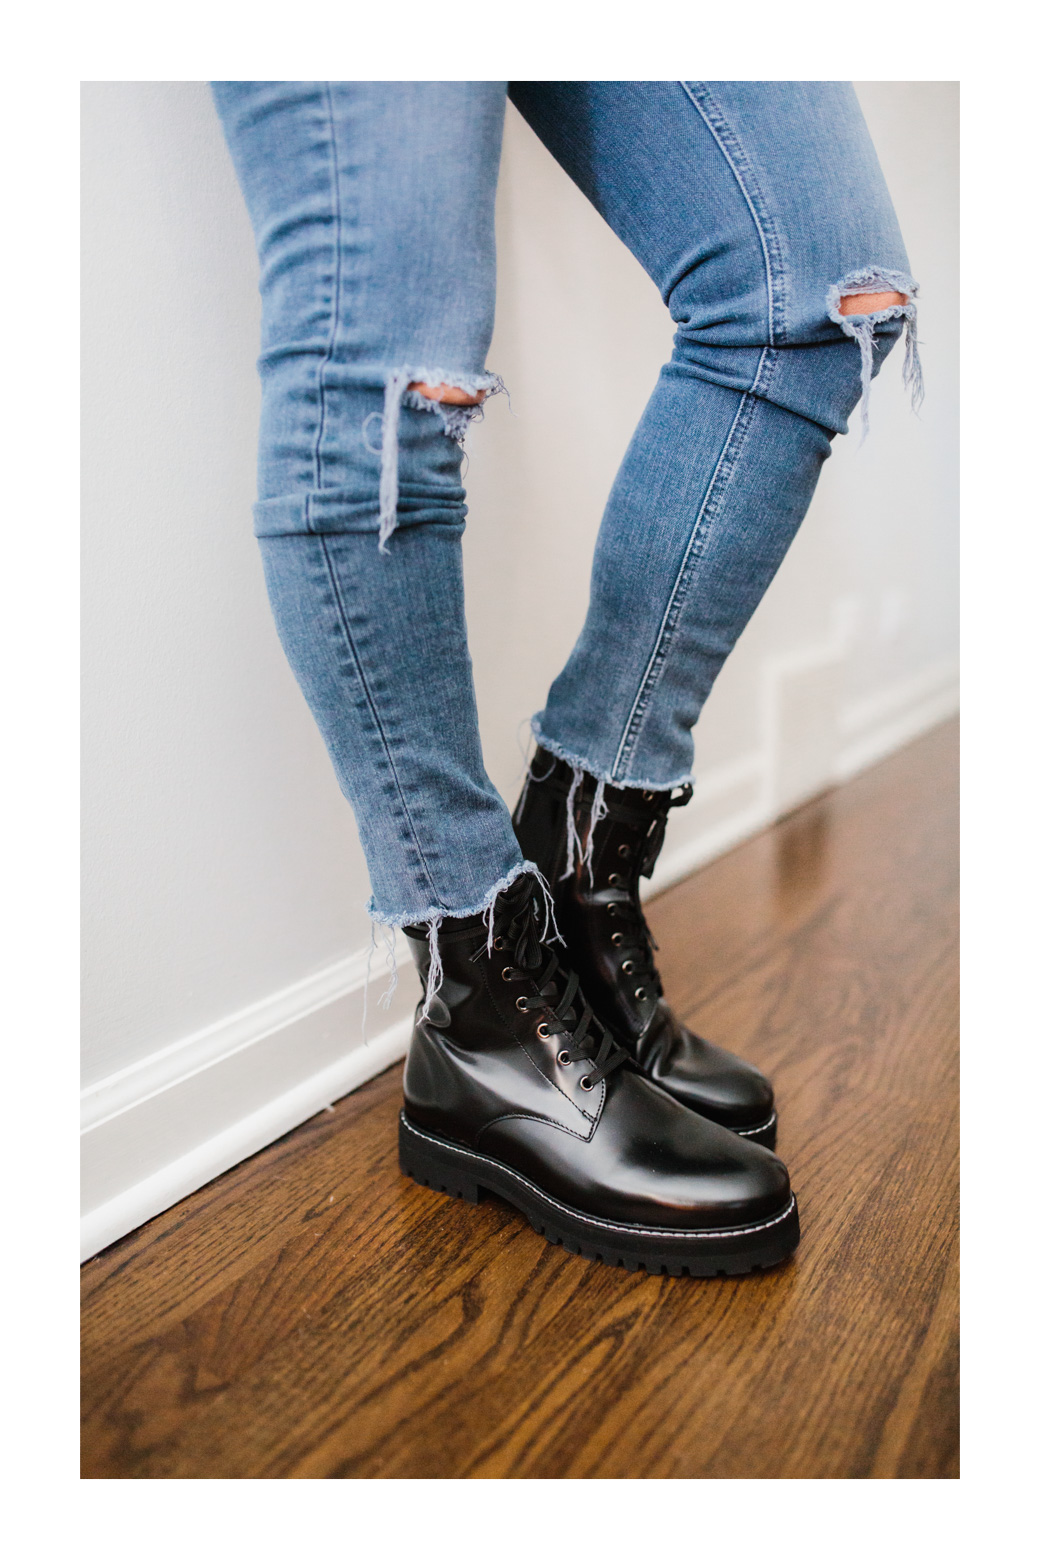 jeans with combat boots